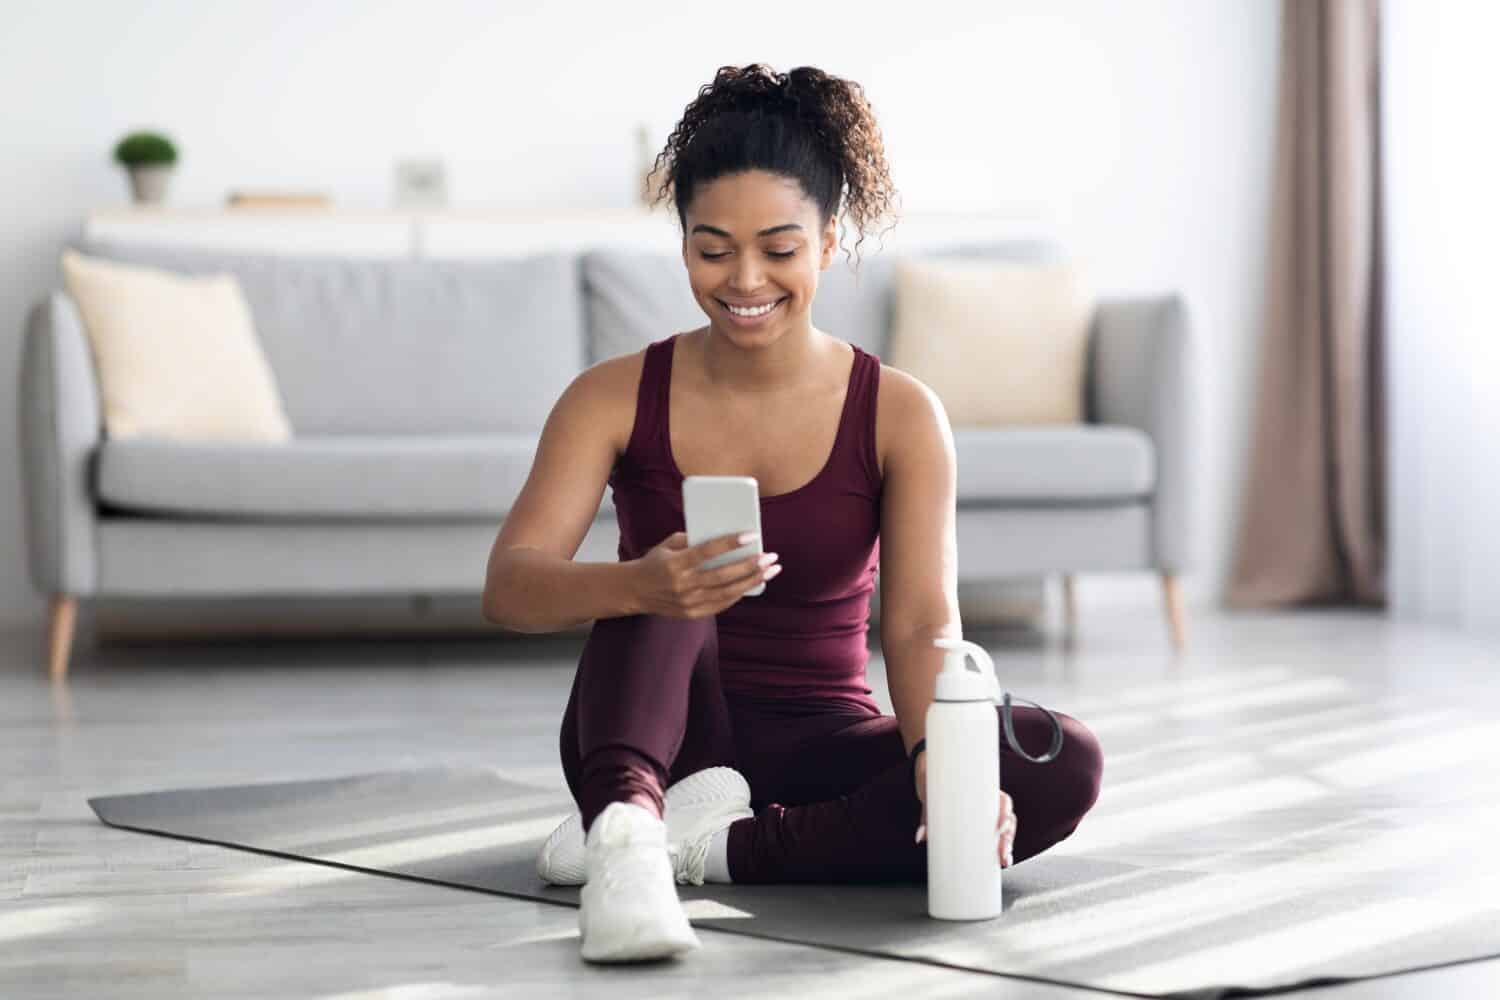 Woman in sportswear sitting on yoga mat at home, holding bottle of water and using the Down Dog yoga app